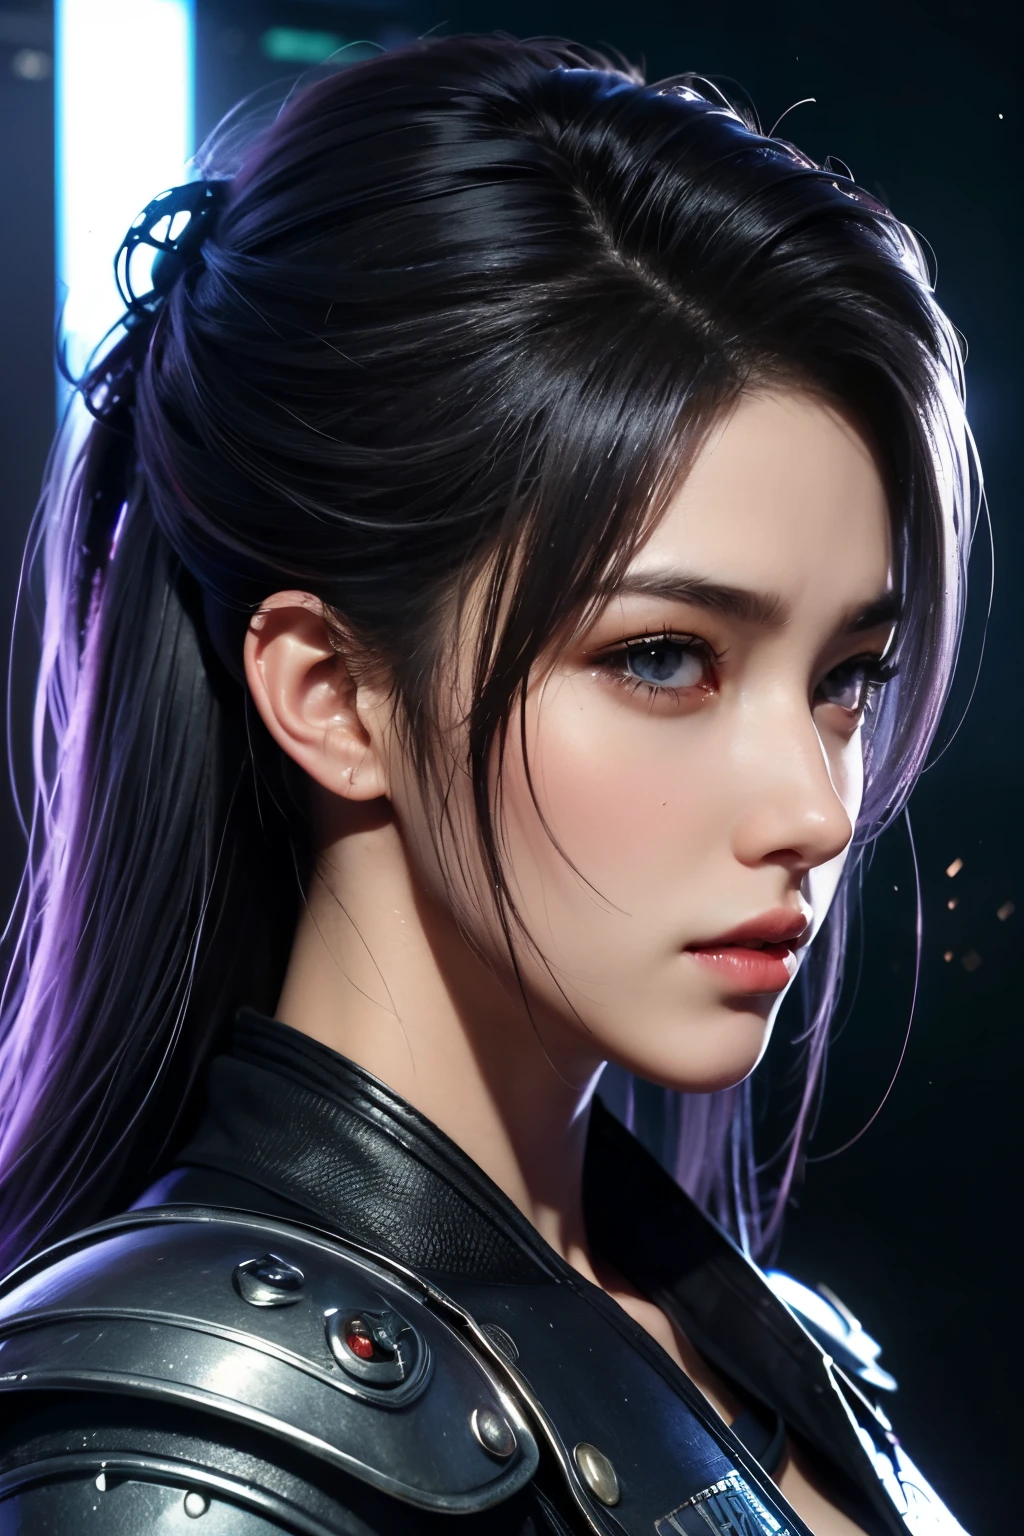 high high quality,A high resolution,masterpiece,8K,(Hyperrealistic photos),(Portrait),digital photography,(Reality:1.4),20-year-old girl,exquisite facial features,a purple eye,Red Eyeshadow,((Cyberpunk-style police officer)),Random hairstyles,(white color hair),Big breasts,(Sci-fi and realistic police uniforms,Combat uniforms,Openwork design,power armour,Metal shoulder pads,complex clothing patterns,Exquisite police badge),Keep your mouth shut,Frowning,ssmile,Cold and serious,extremely detailed expression,realistic detail,Light magic,Photo pose,oc render reflection texture